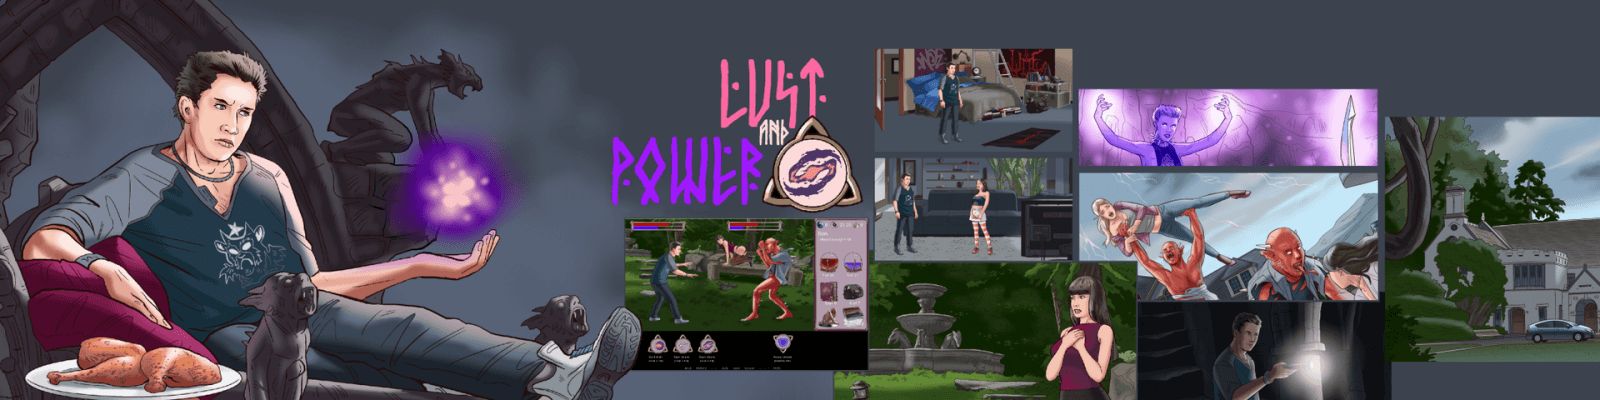 Lust And Power Adult Game Download